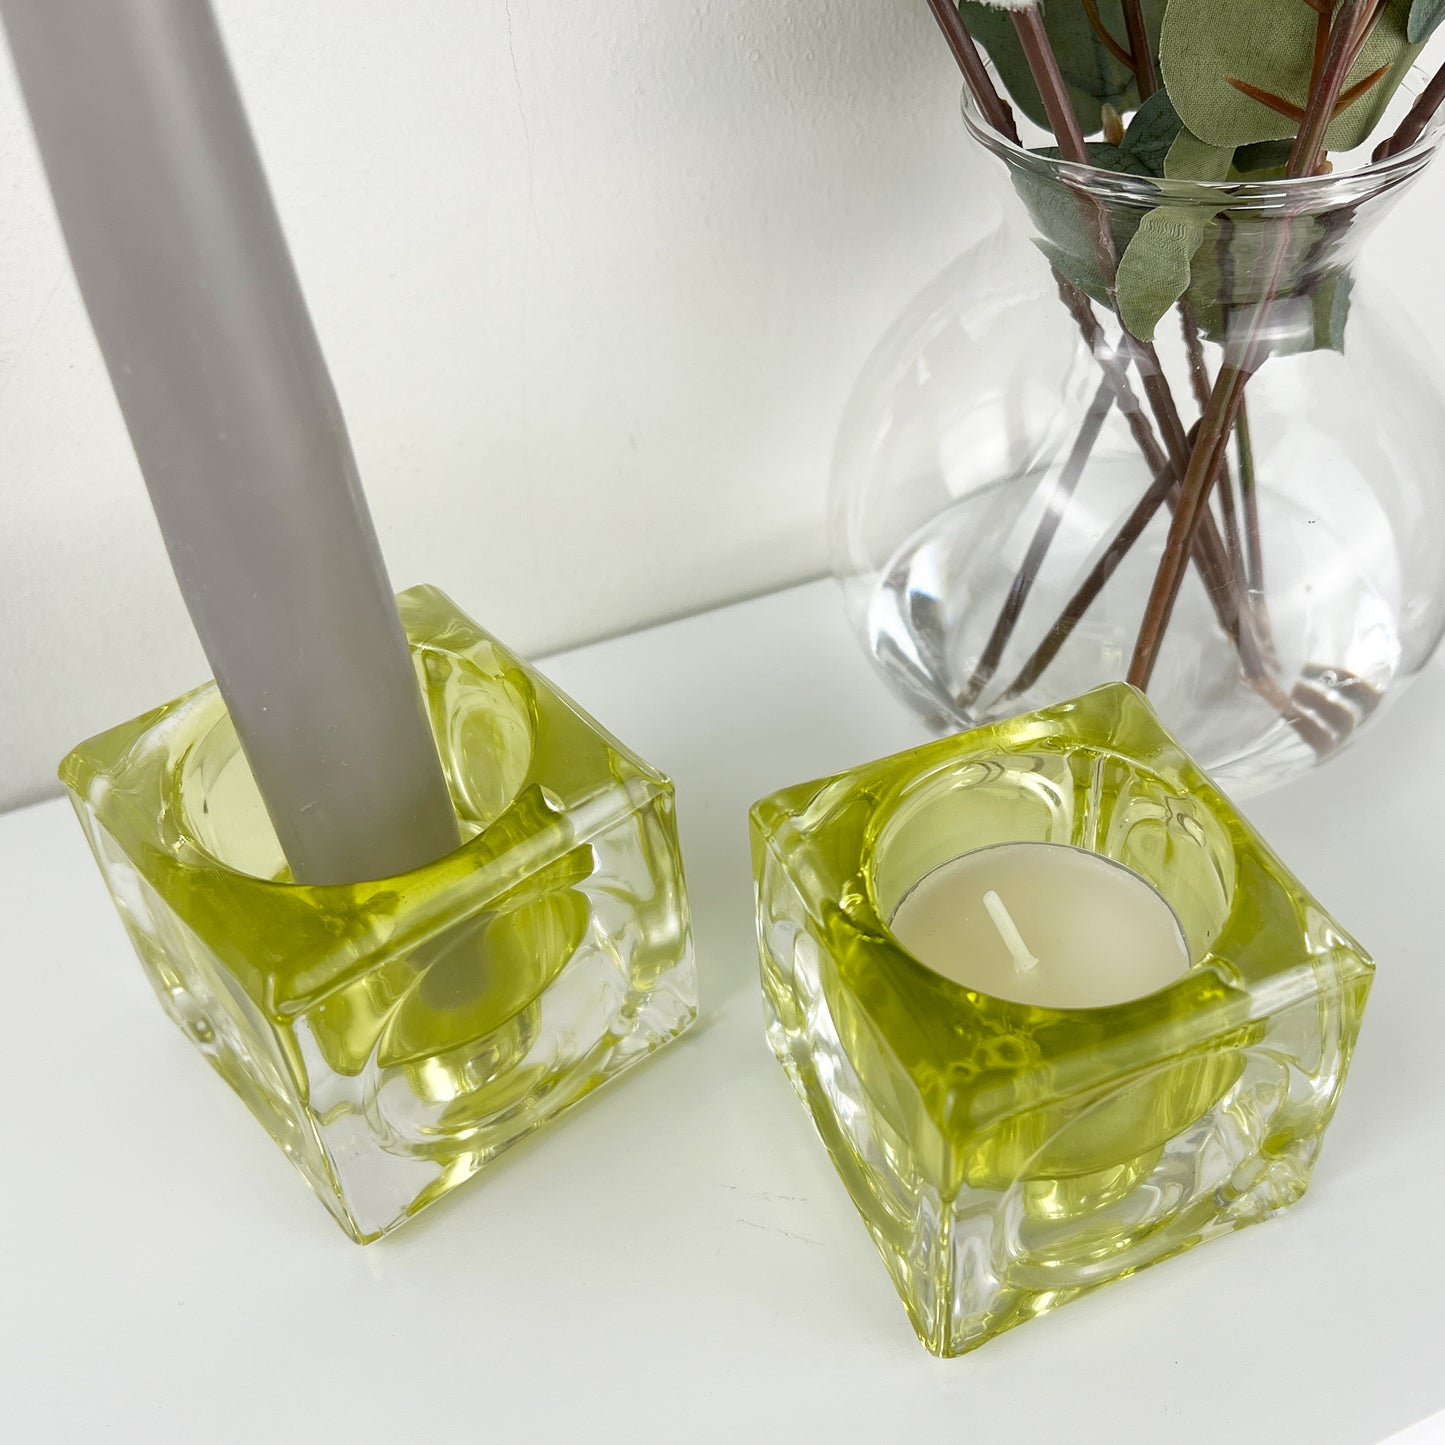 Pair of Glass Block Candle Holders